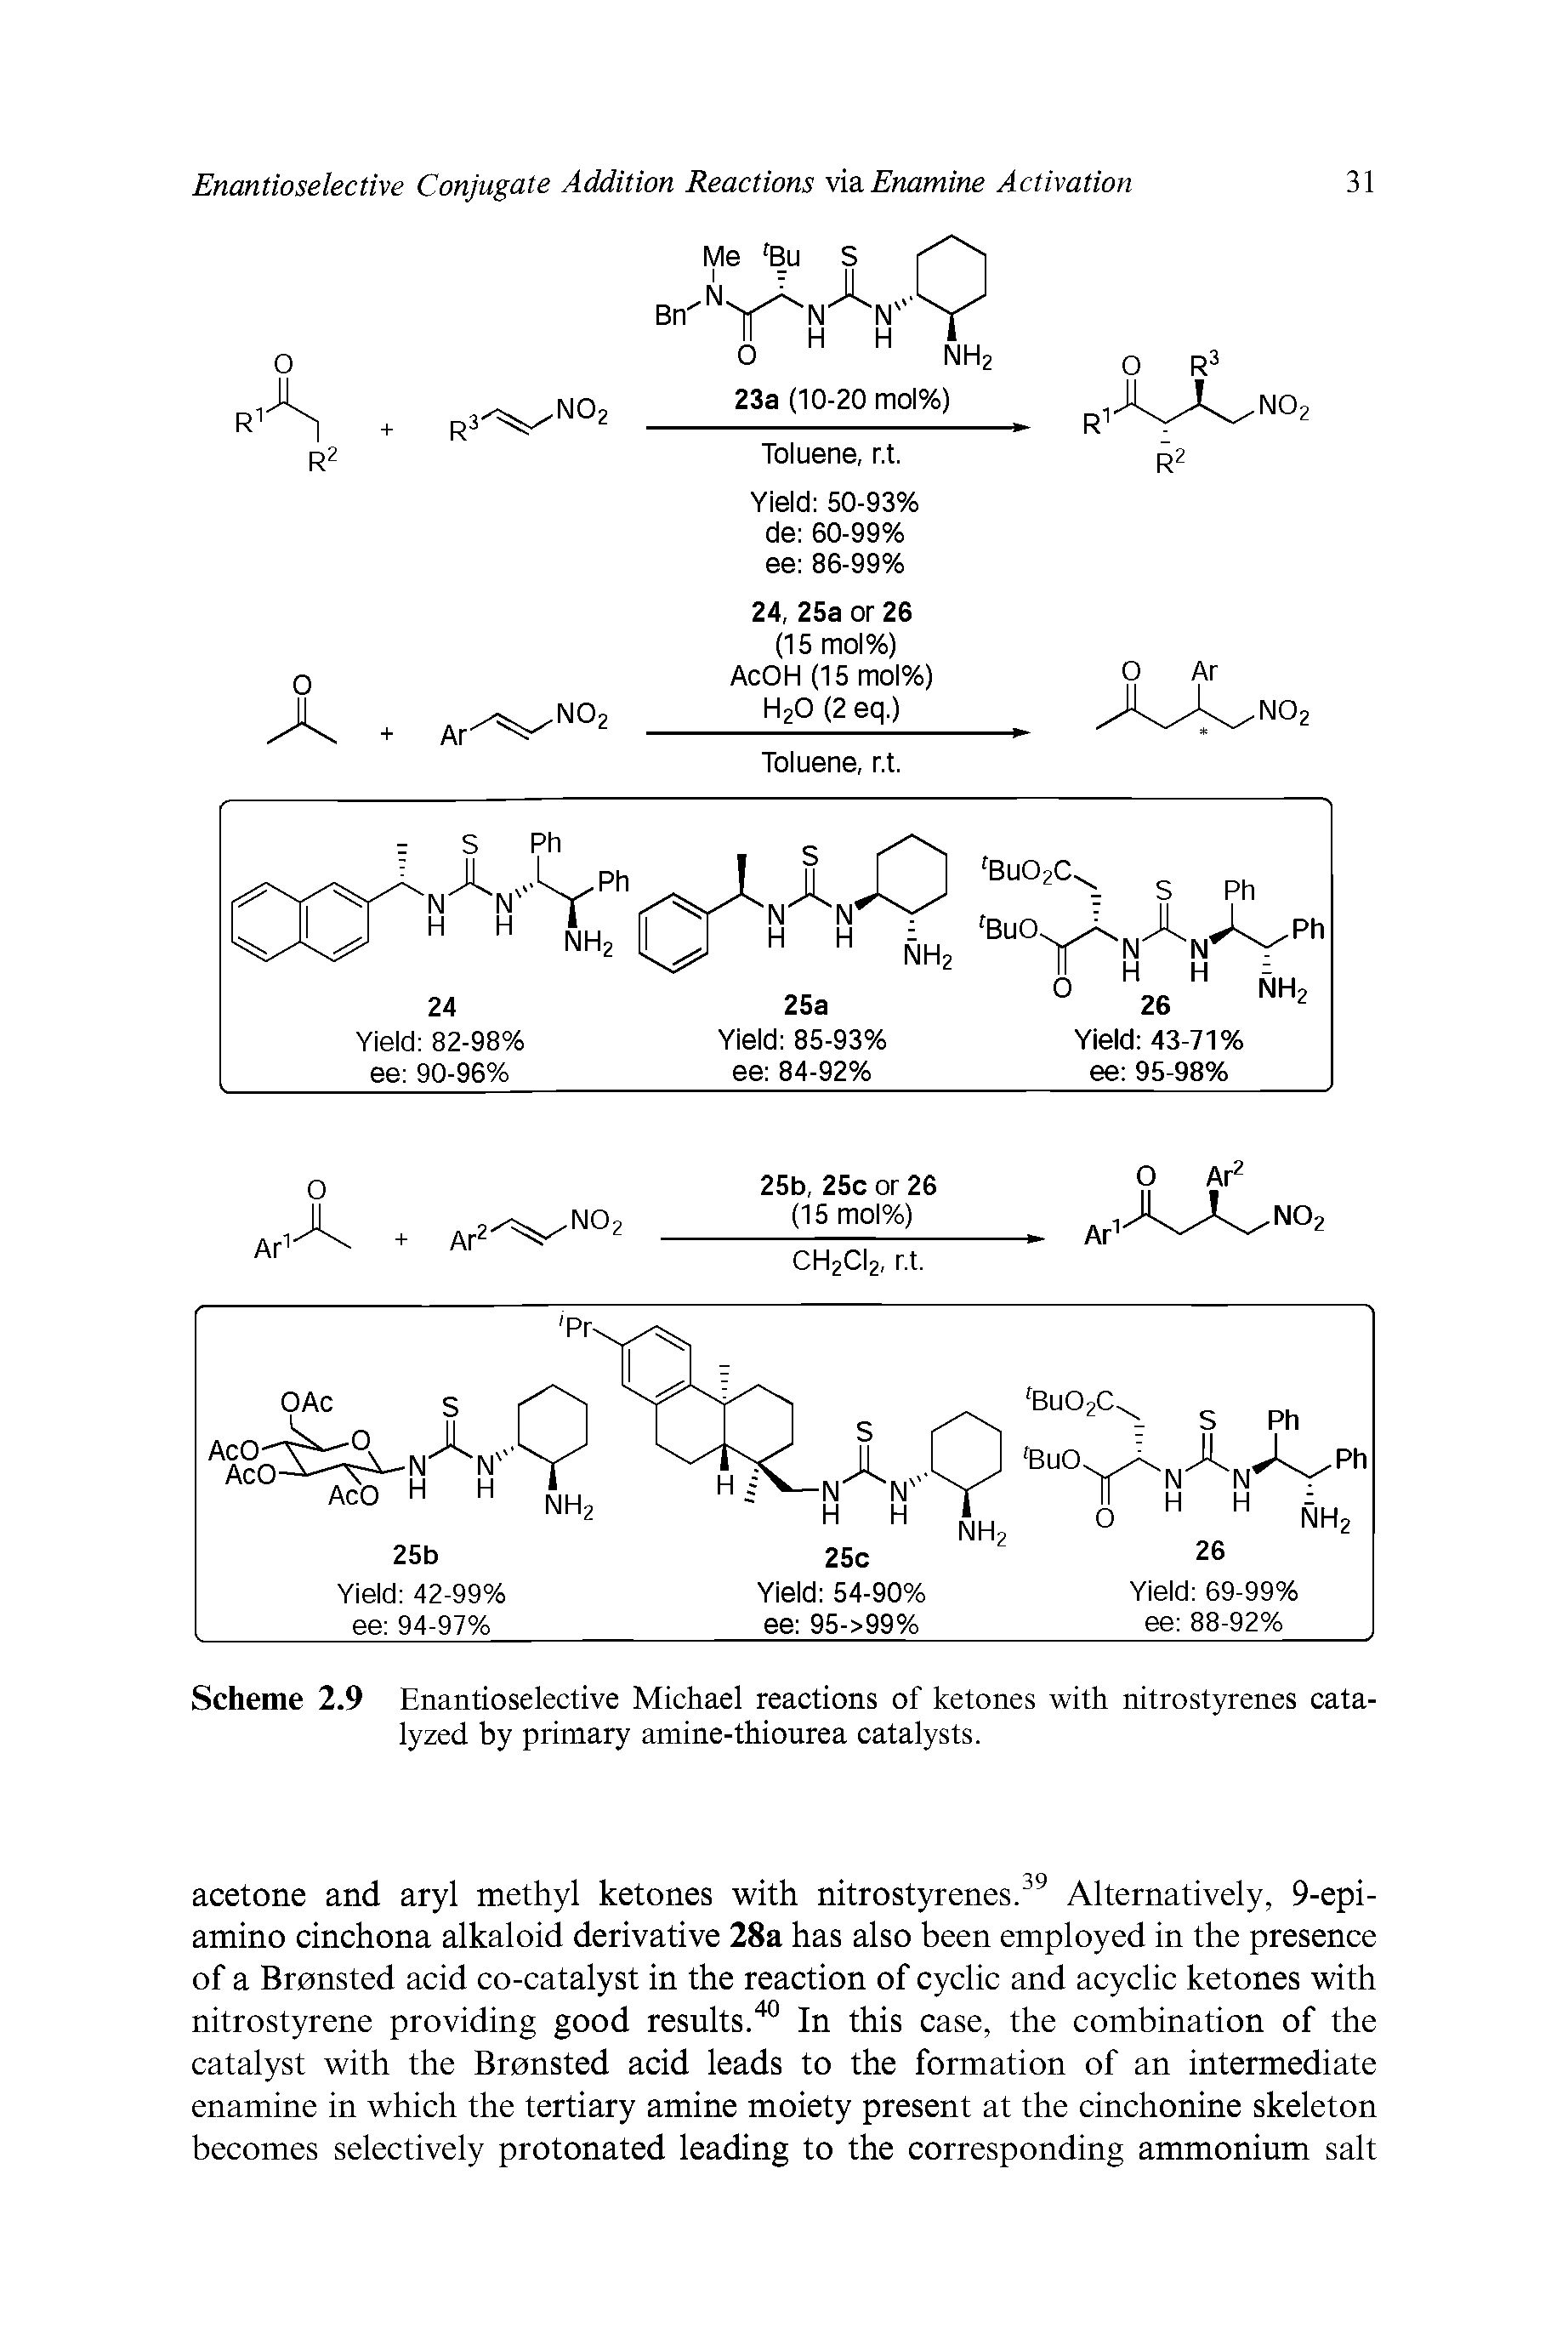 Scheme 2.9 Enantioselective Michael reactions of ketones with nitrost5renes catalyzed by primary amine-thiourea catalysts.